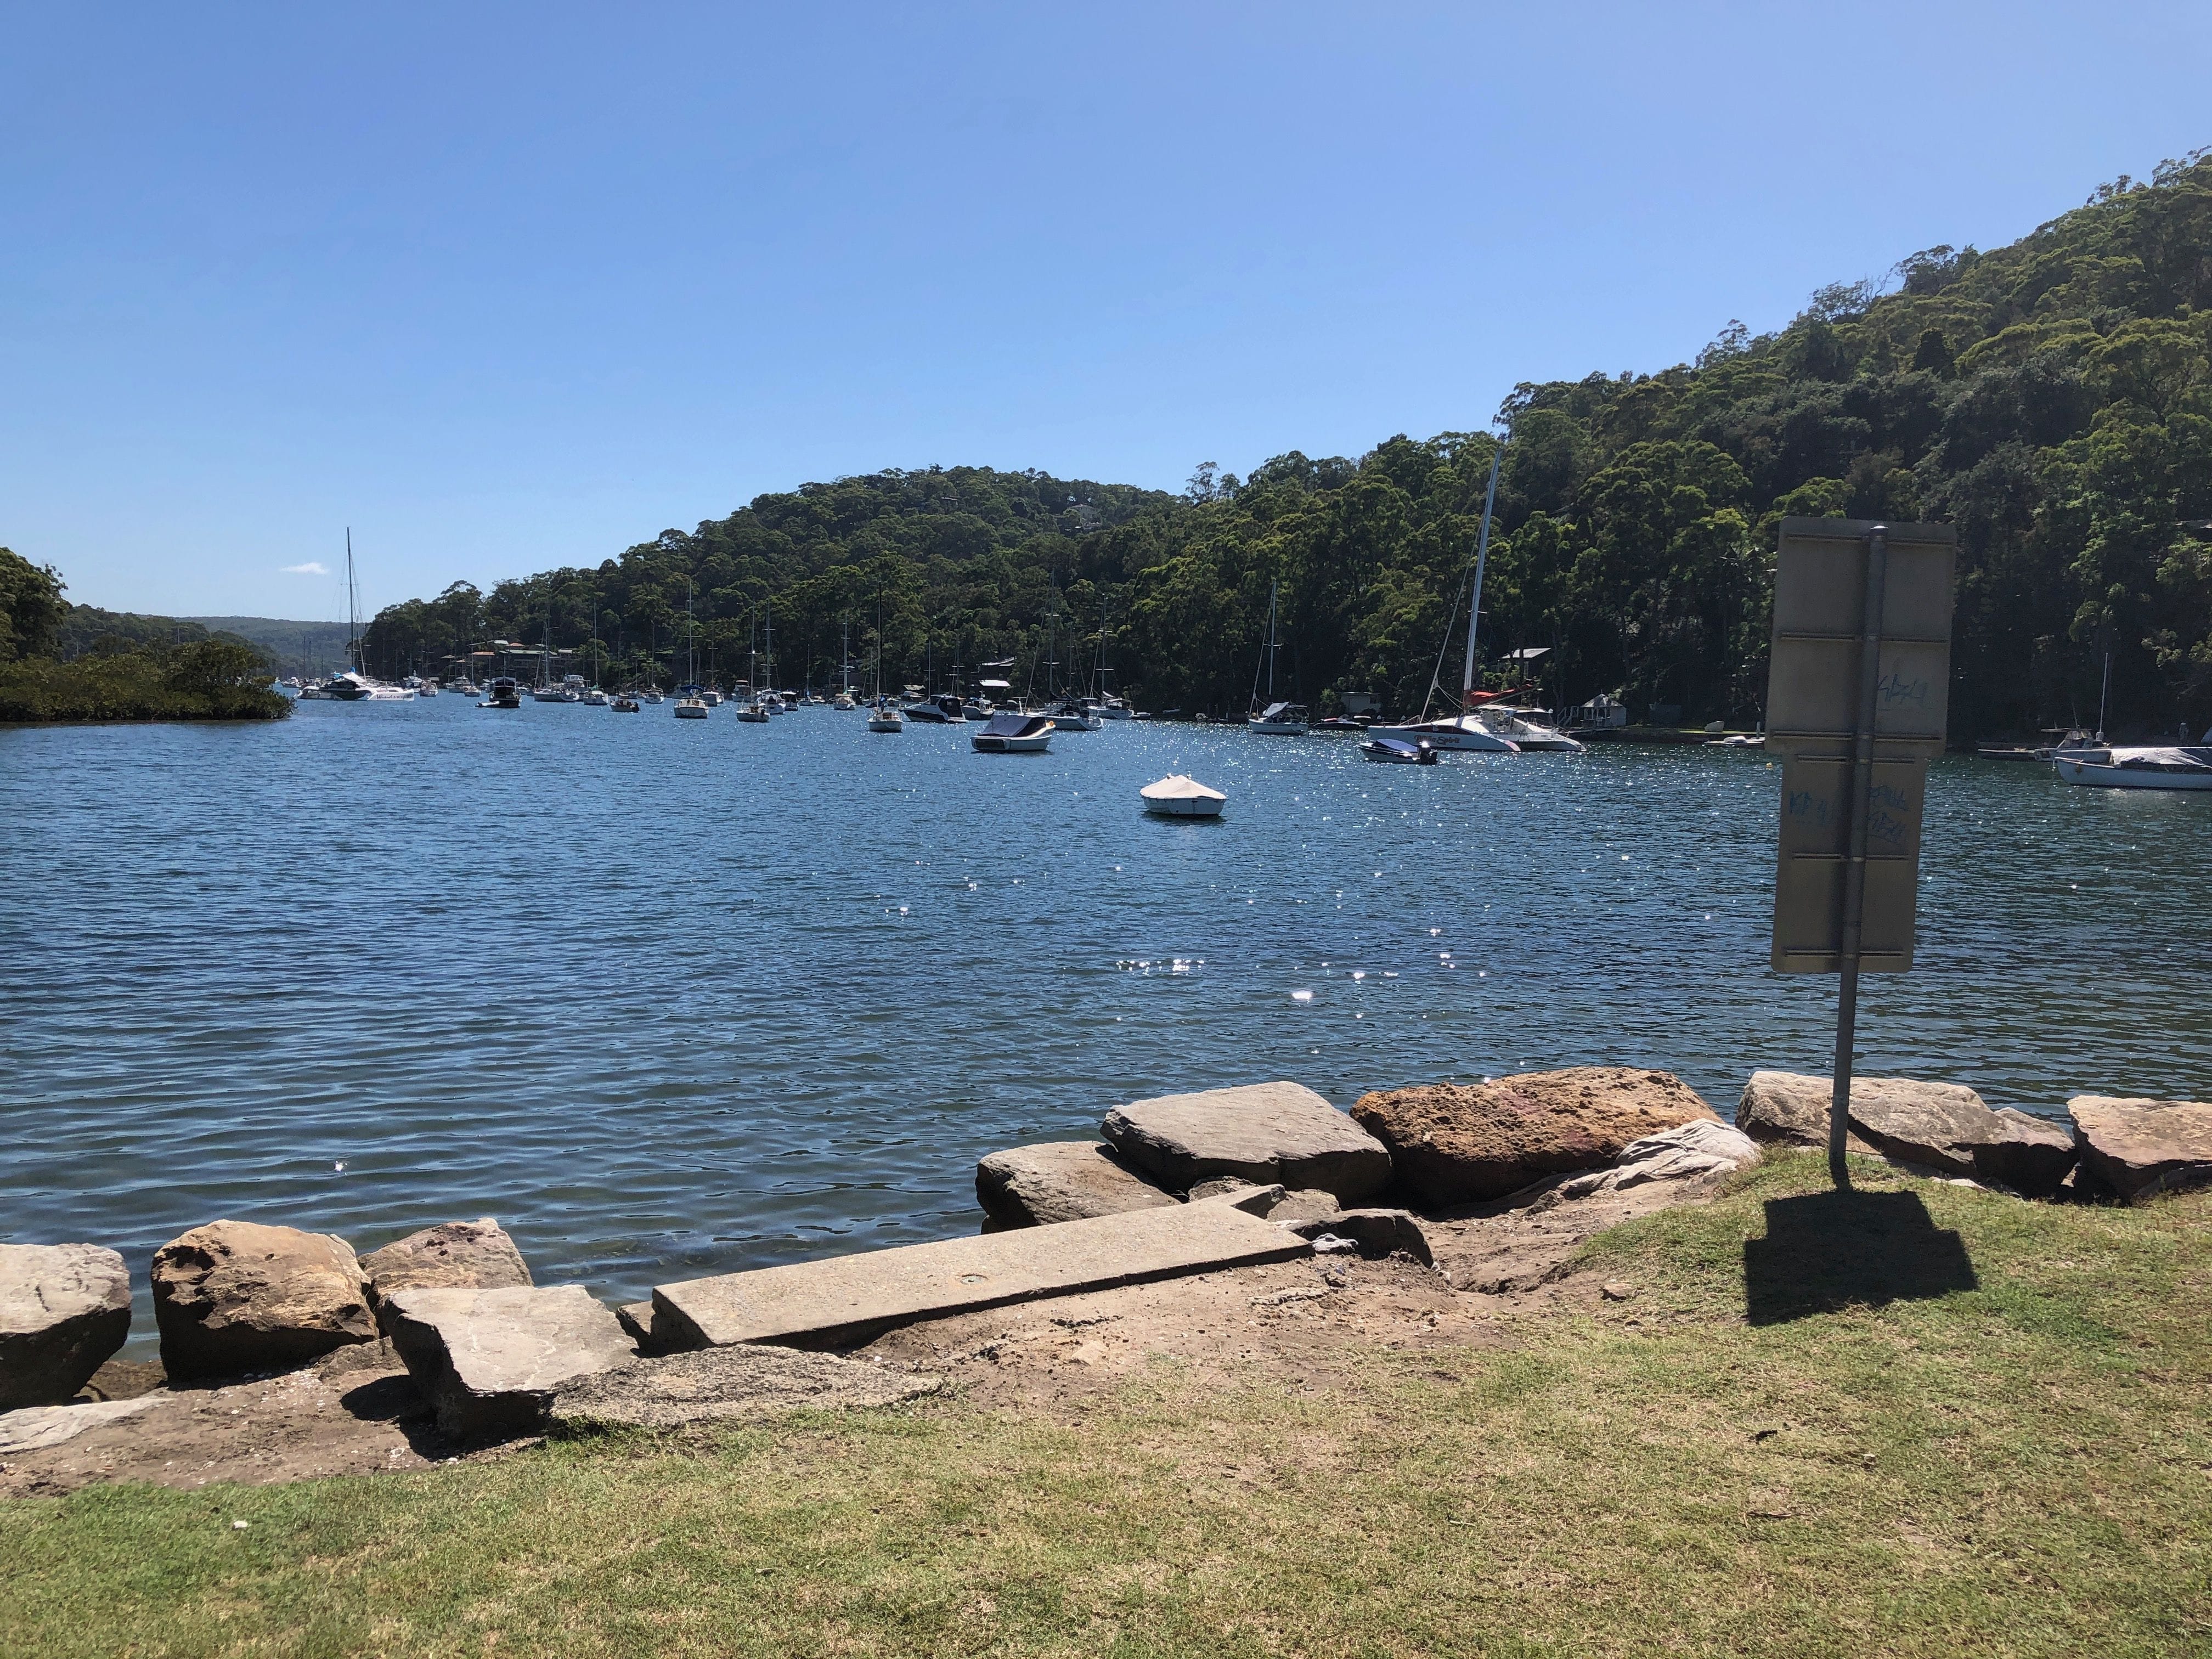 Northern Beaches Public Day Tour febuary 2019 Image -5c64962f28be7